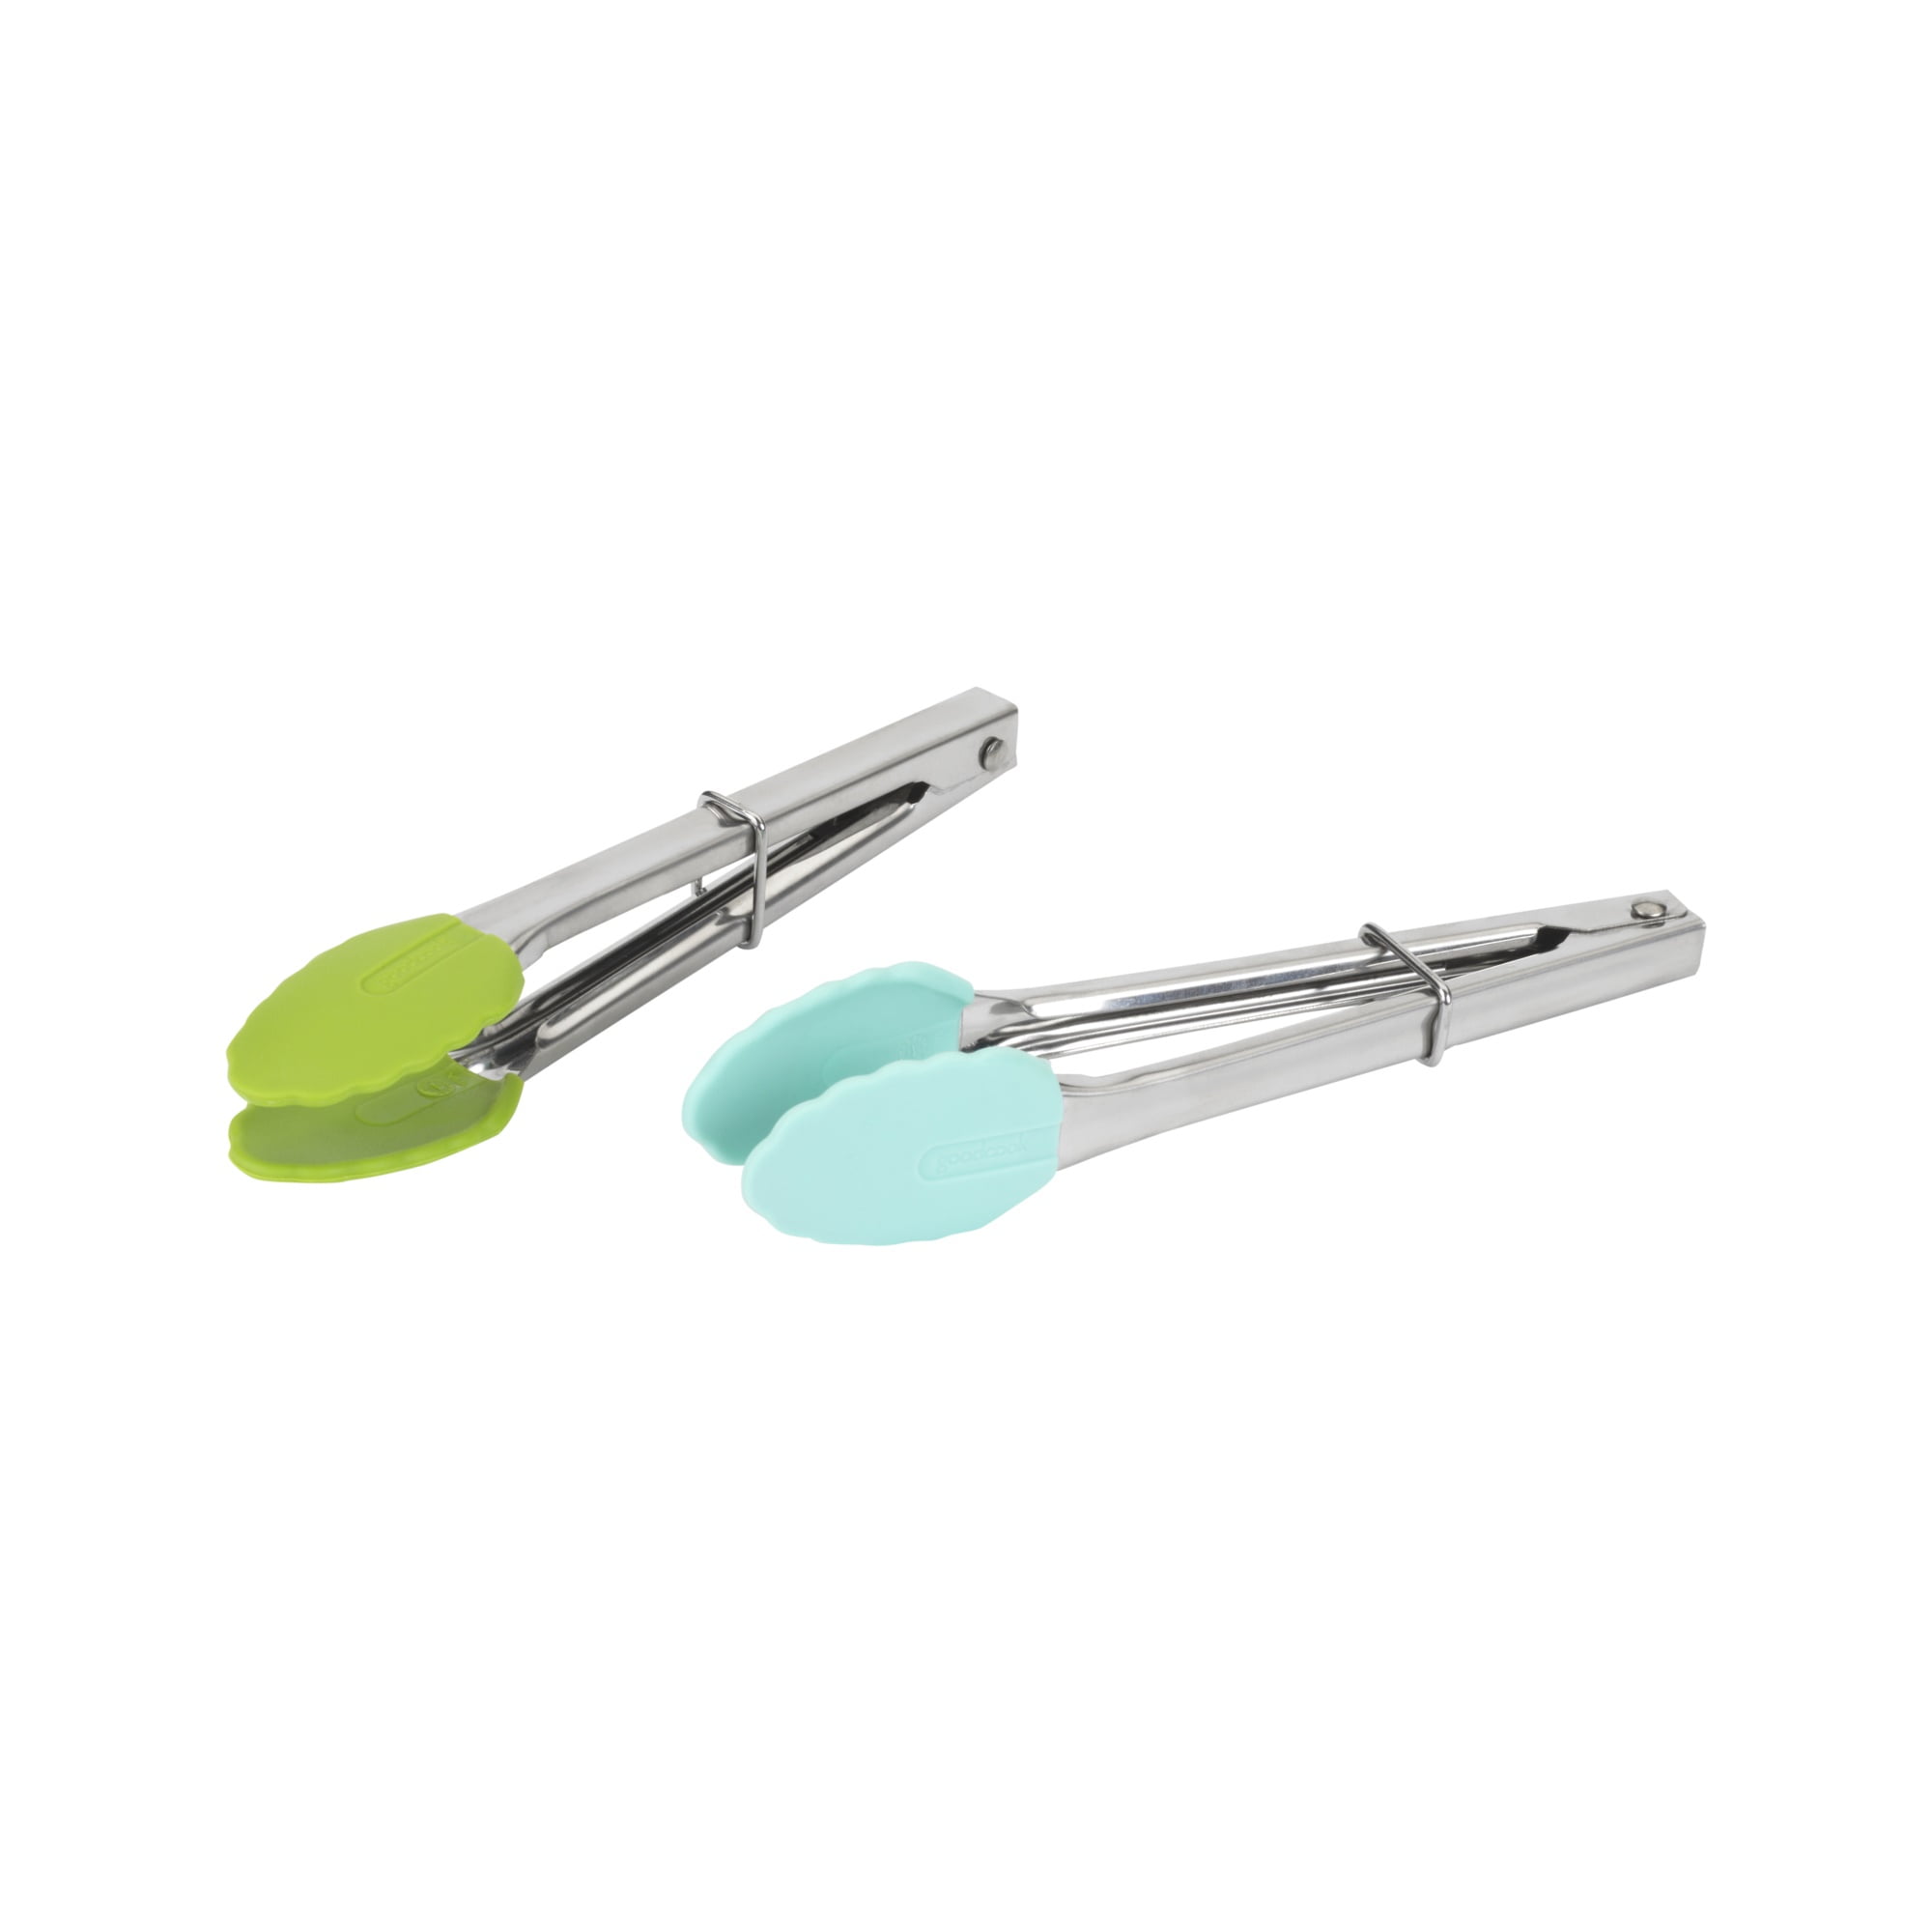 Primecook Stainless Steel and Nylon Kitchen Tong